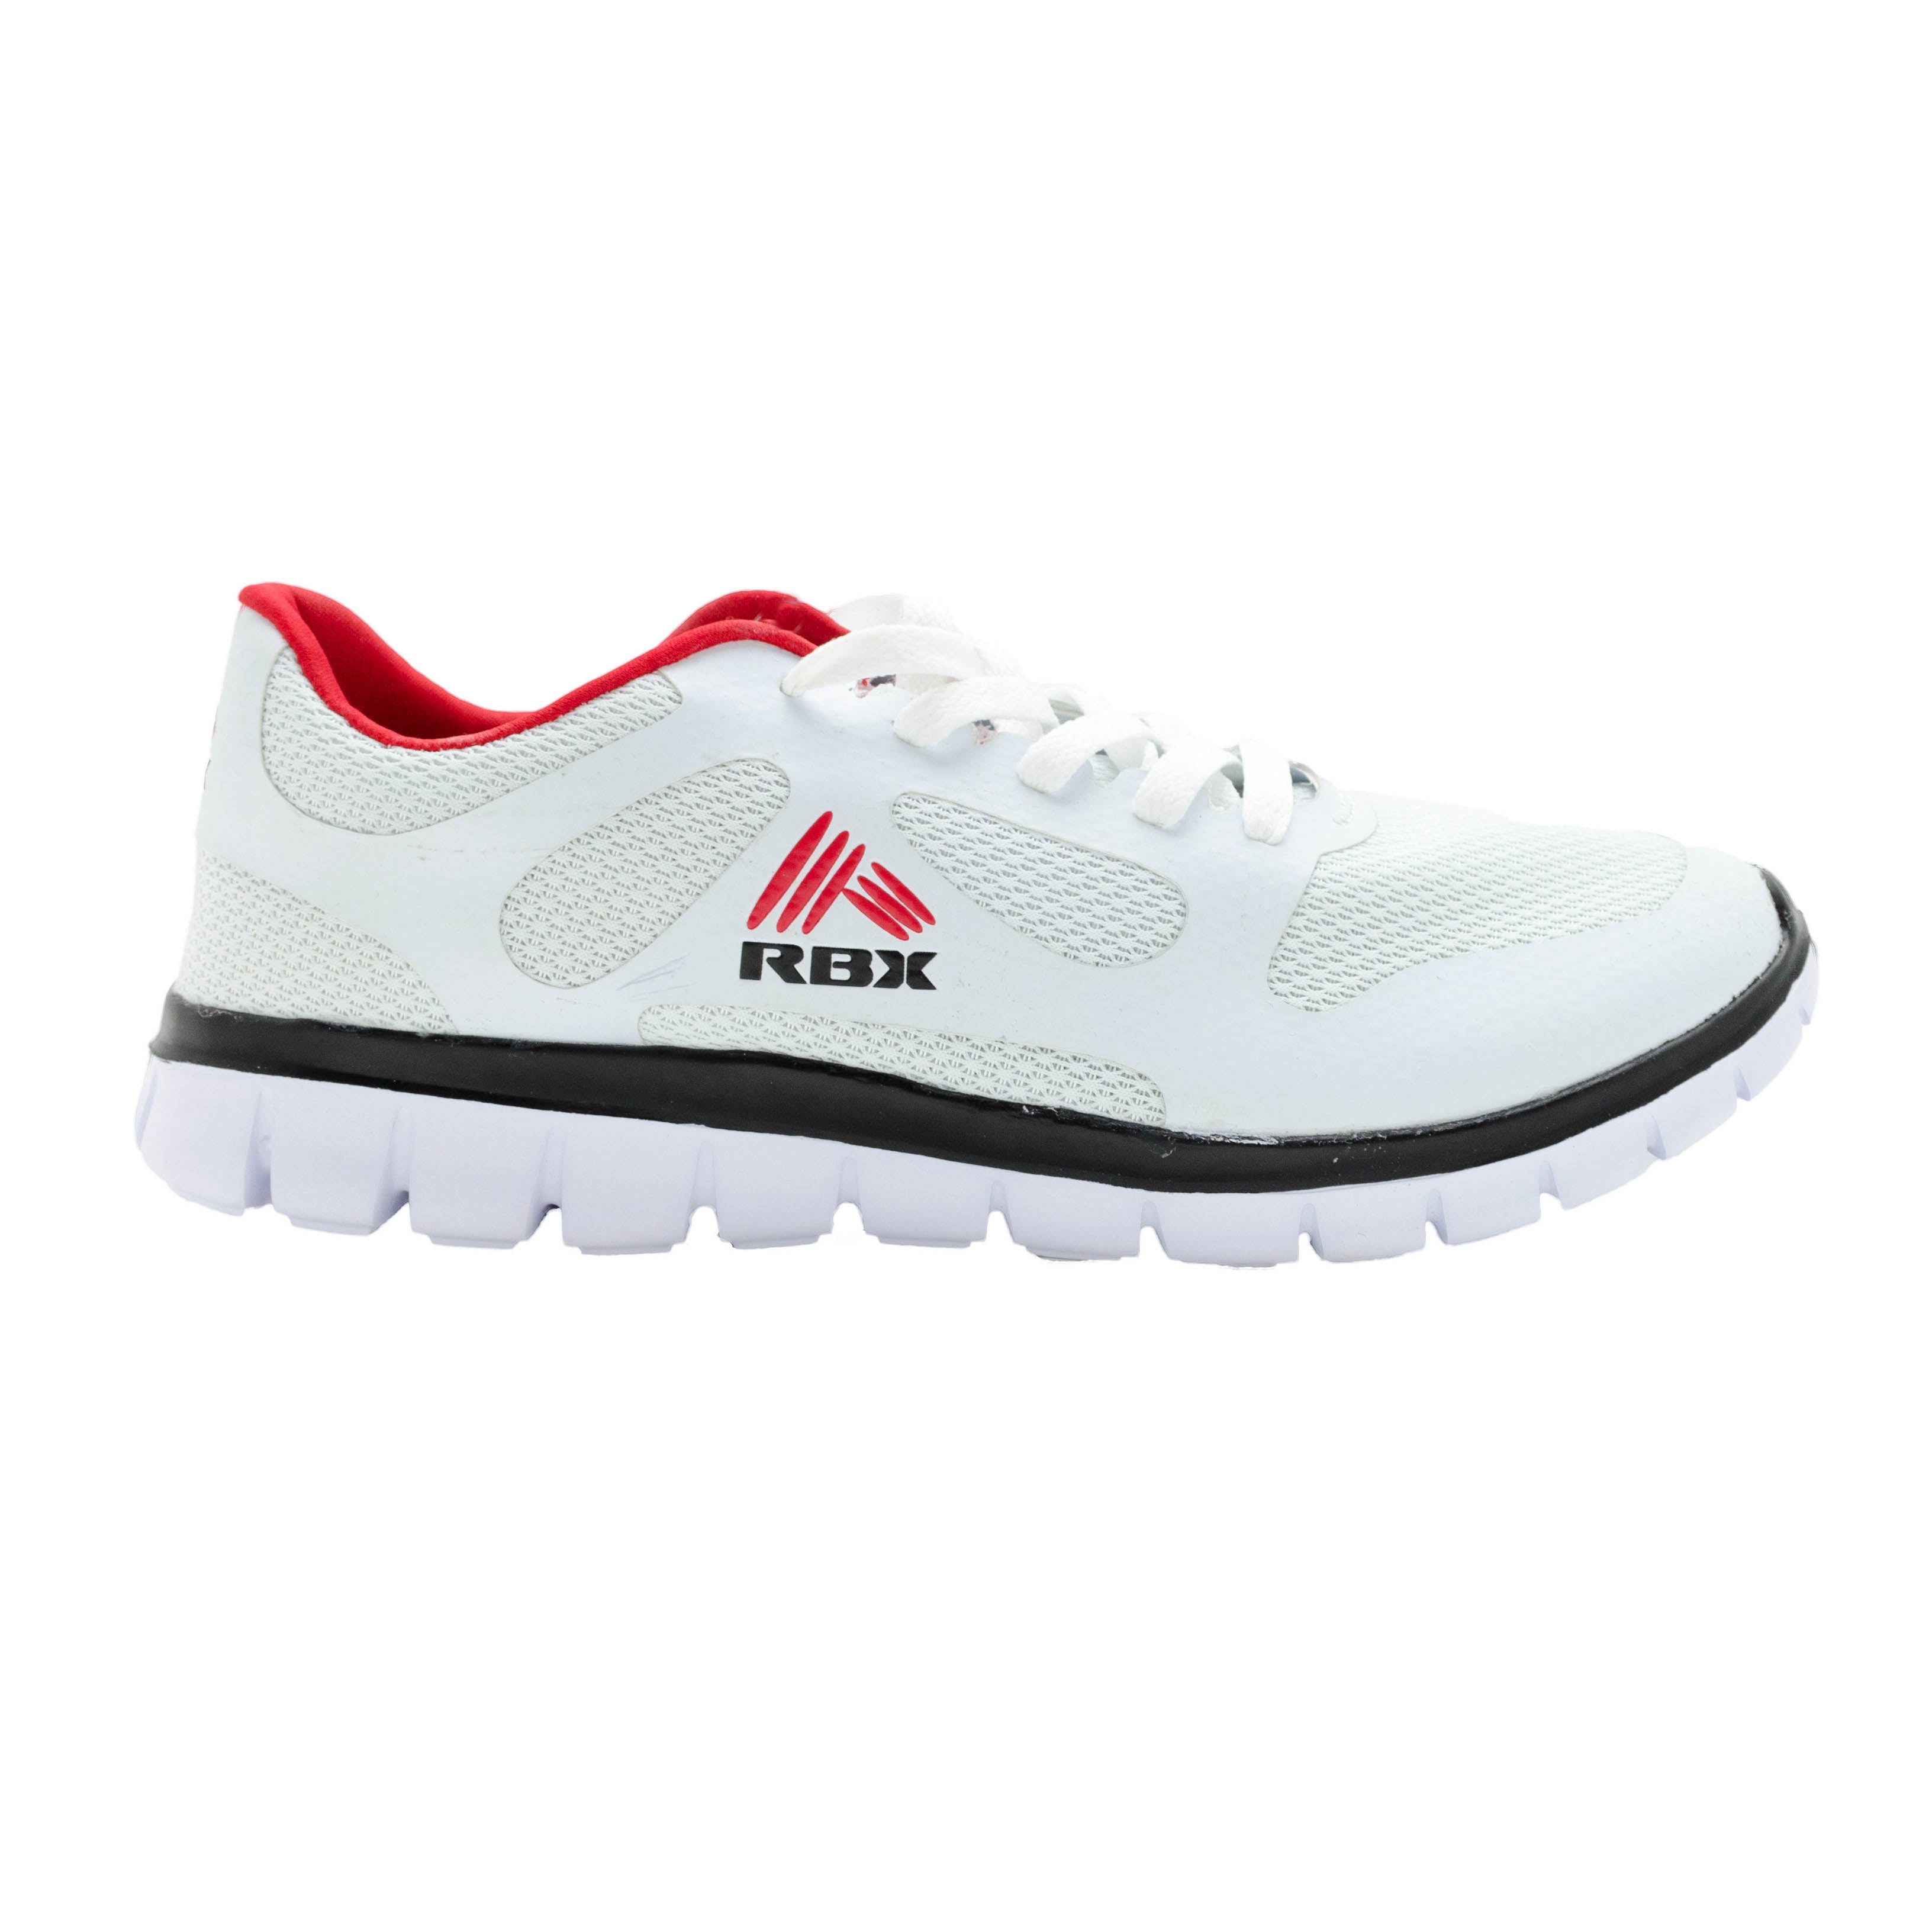 rbx climate men's running shoes